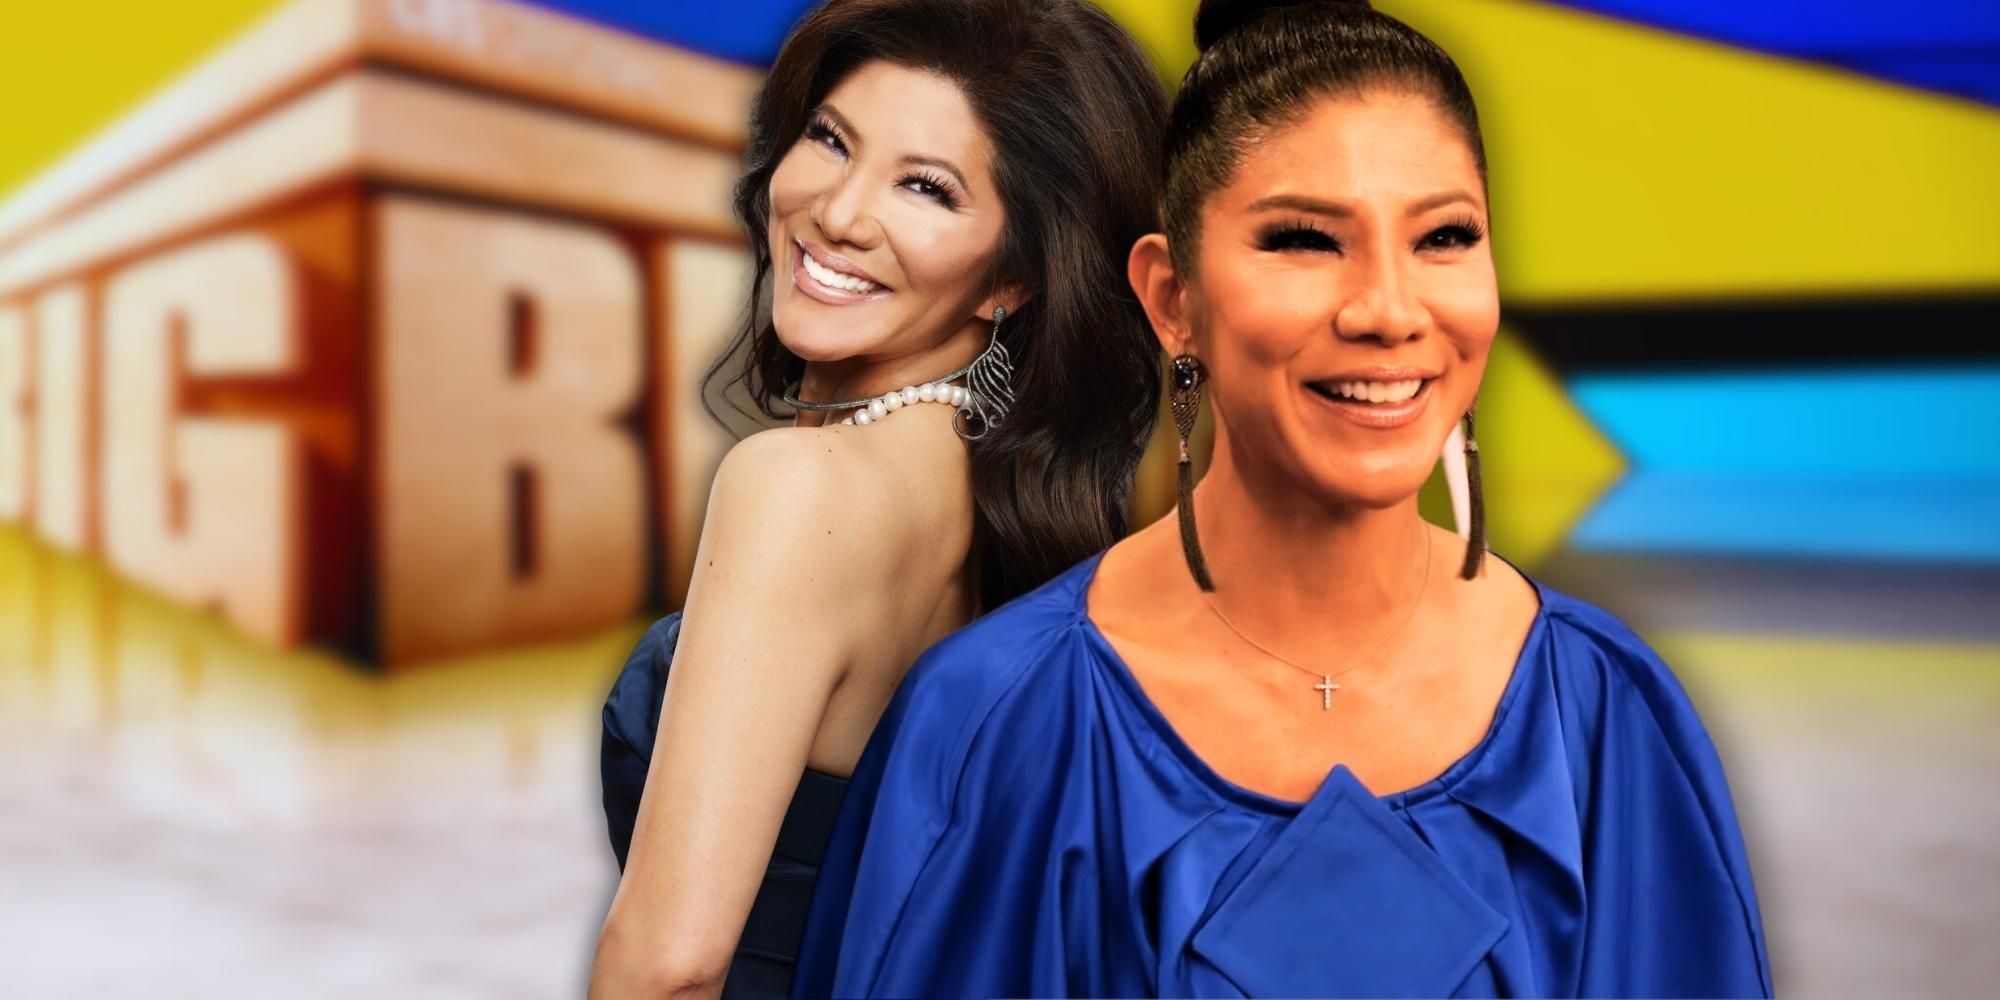 two images of Julie Chen from Big Brother smiling side by side